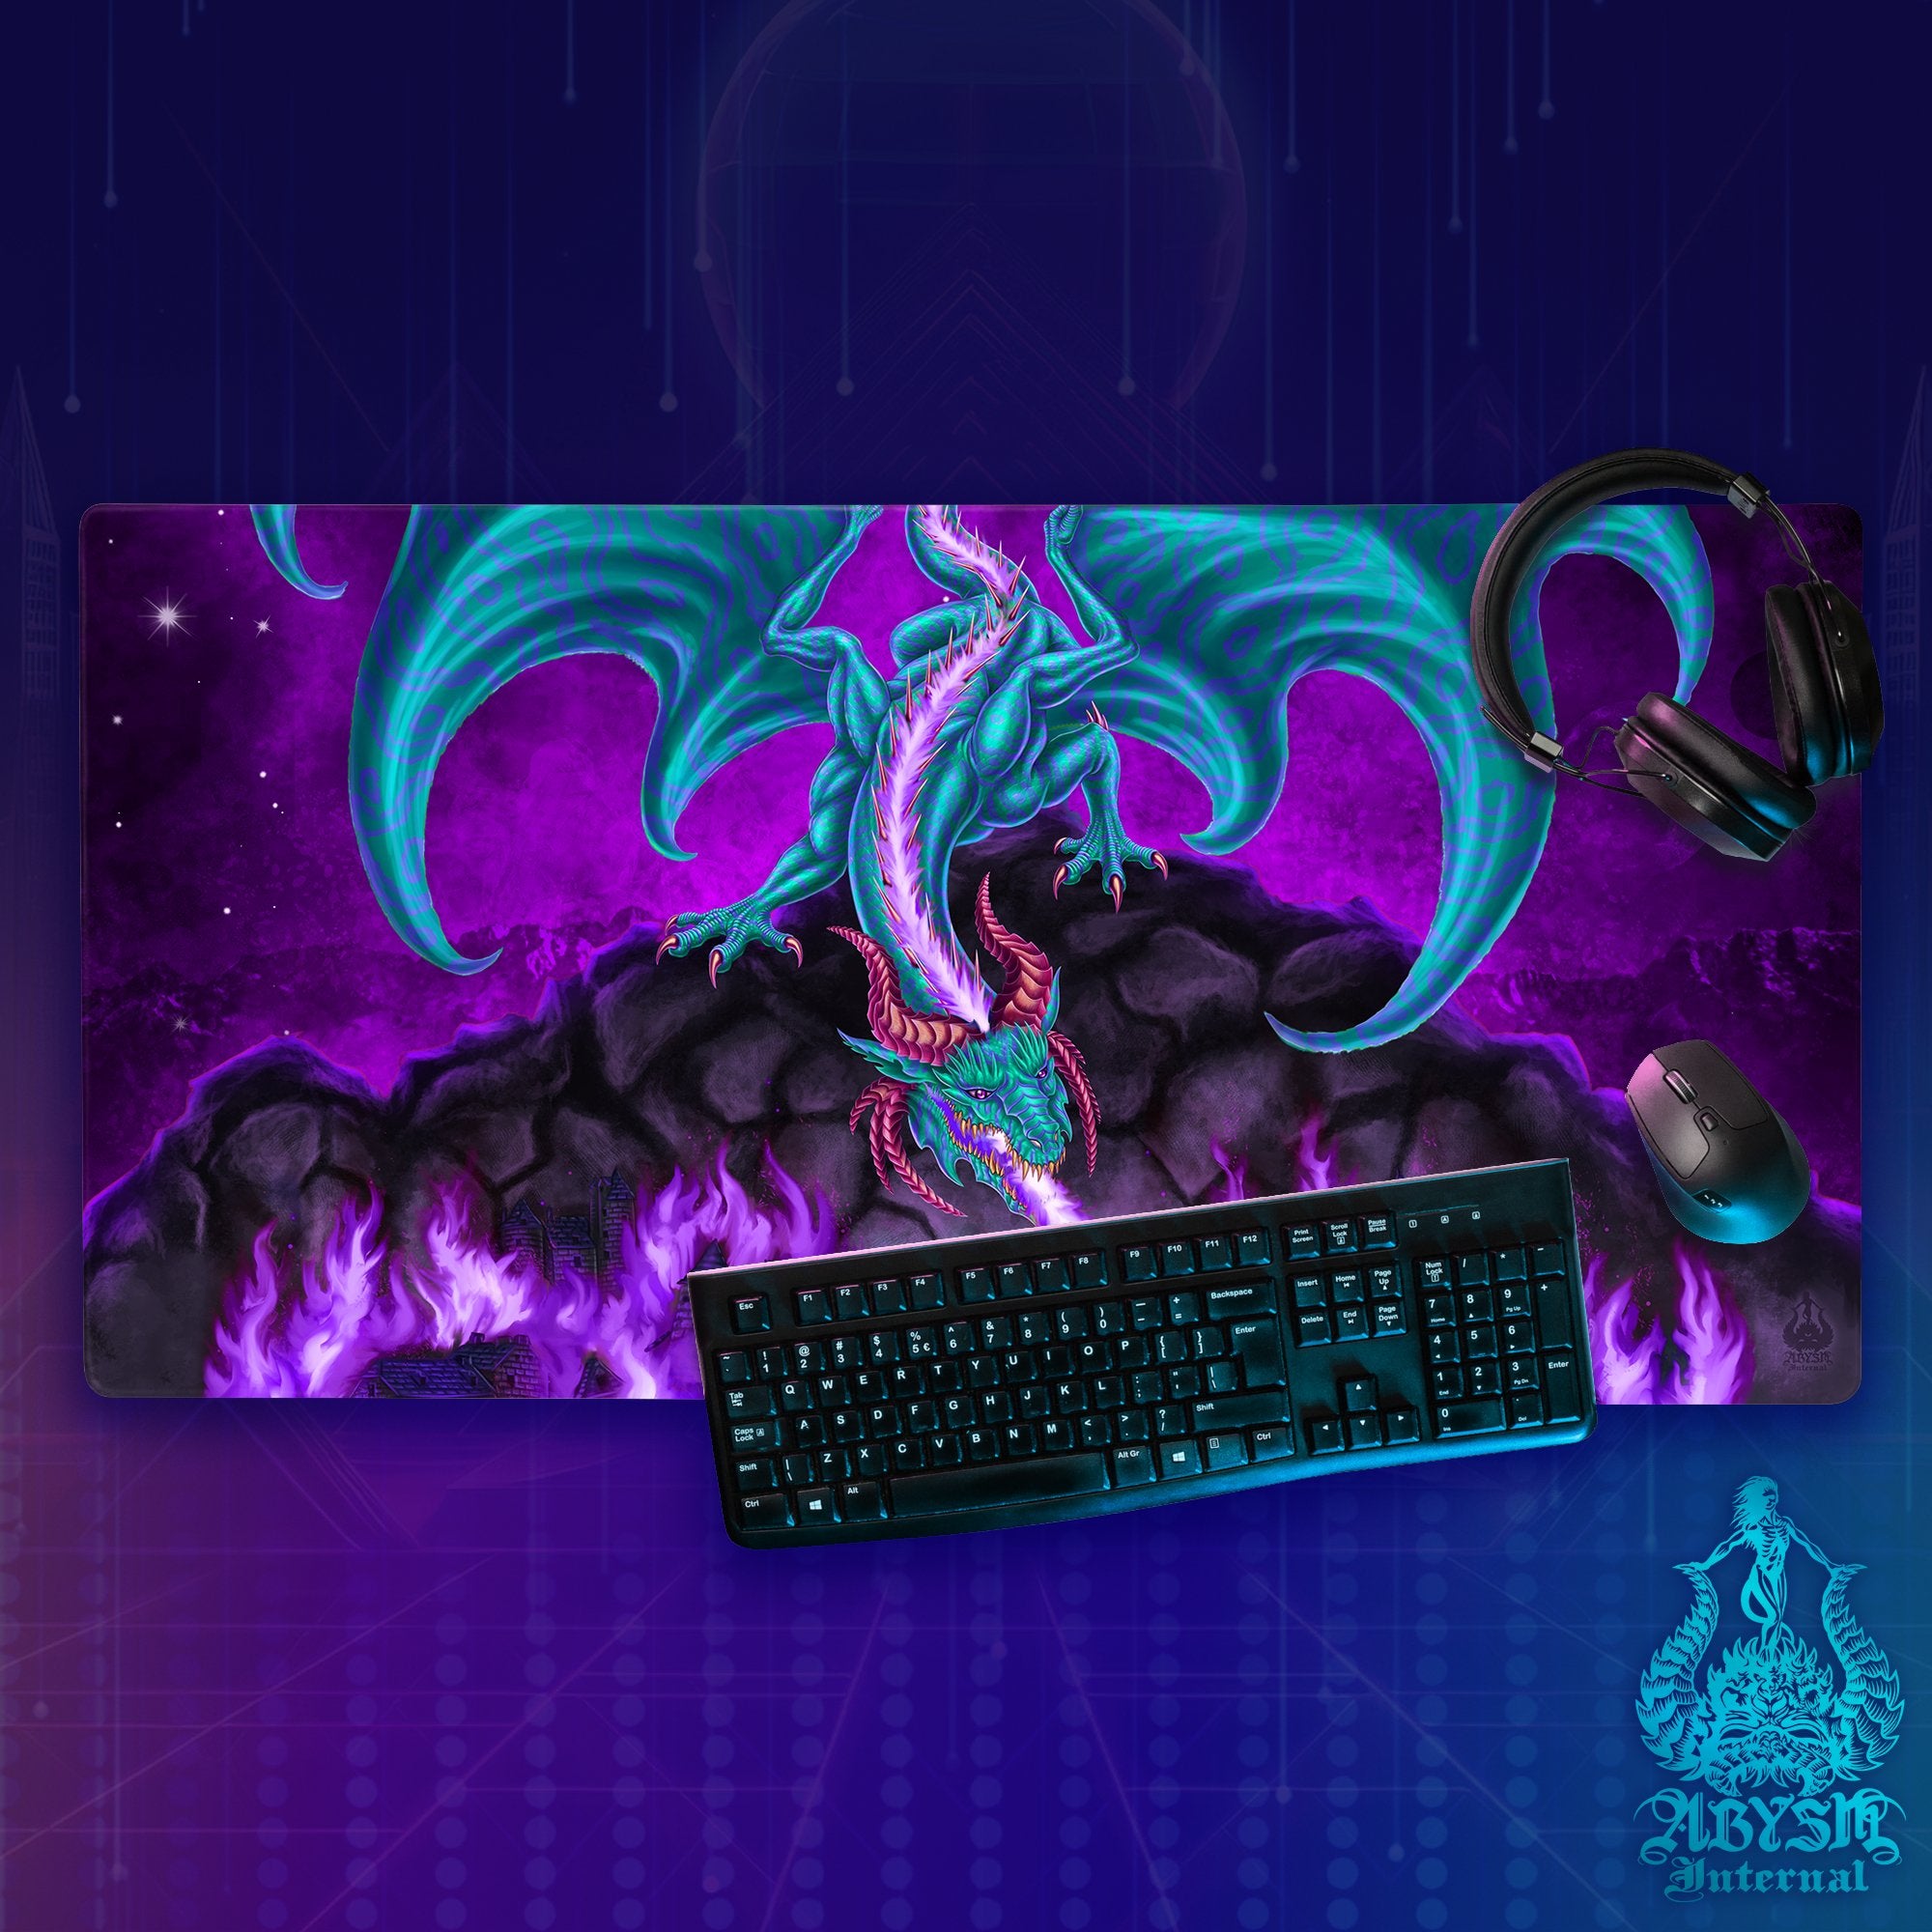 Dragon Gaming Mouse Pad, Fantasy Art Desk Mat, Veal and Purple Table Protector Cover, RPG Workpad, DM Gift Print - Fire - Abysm Internal